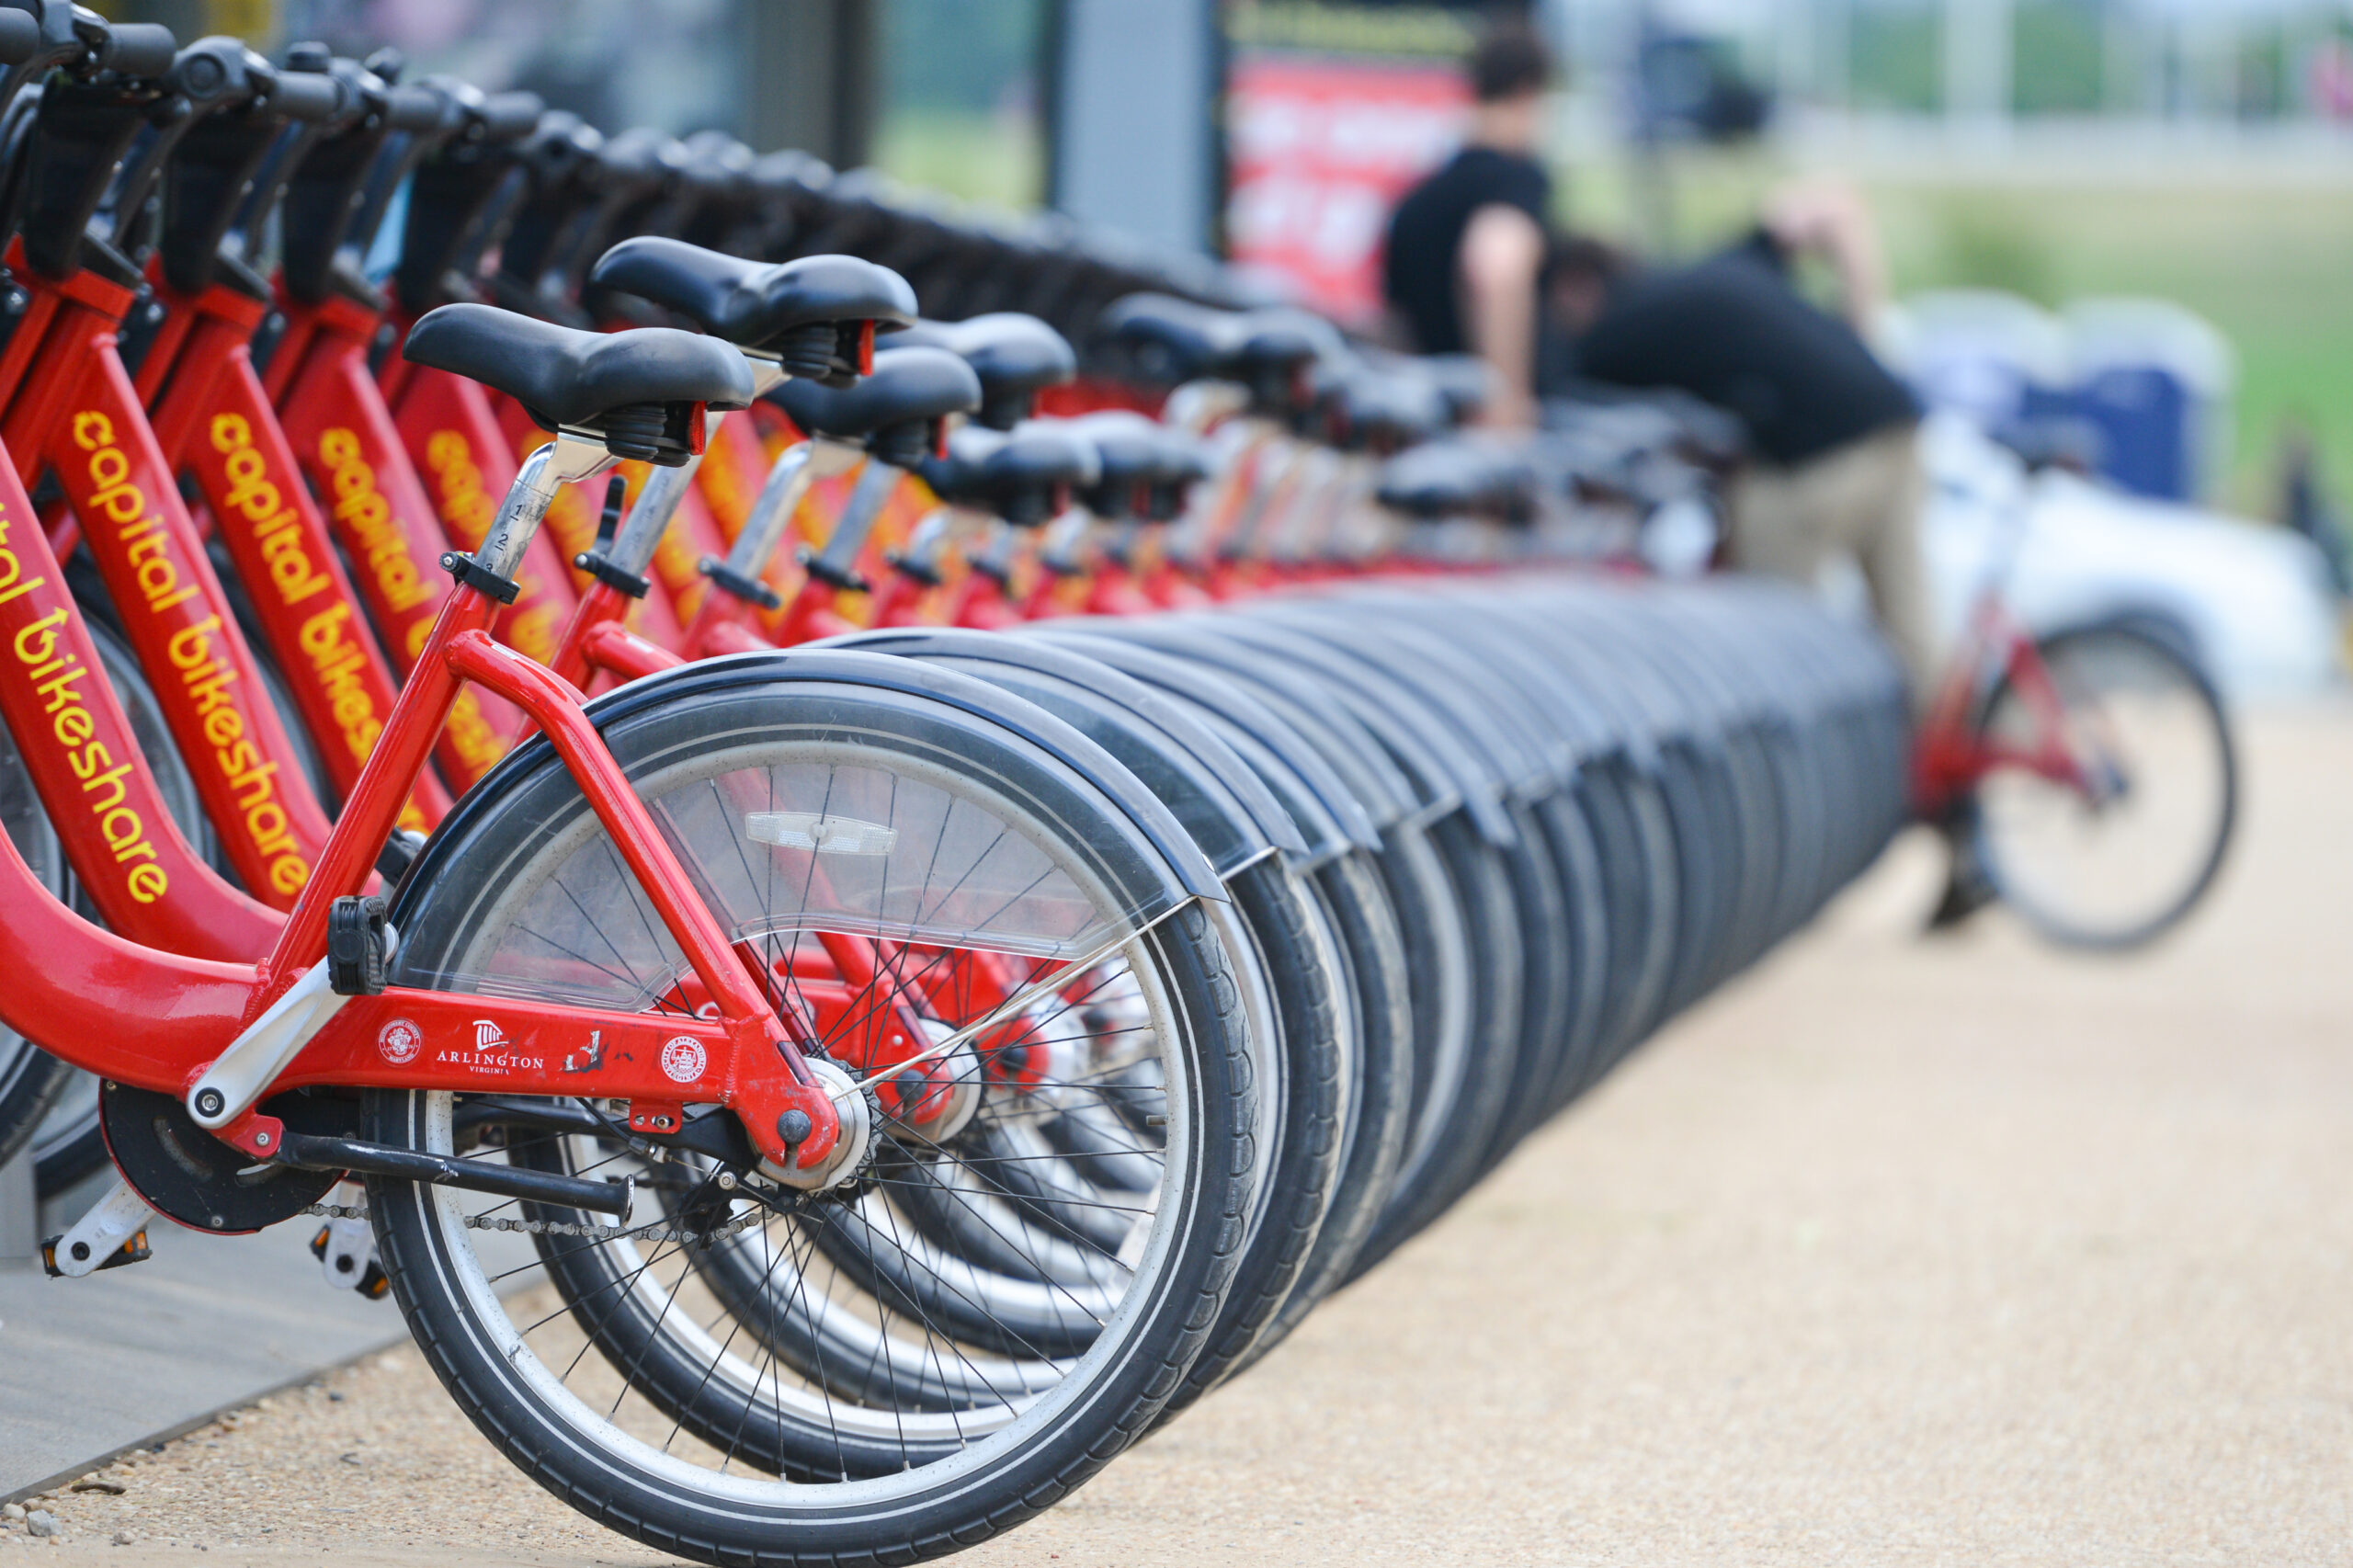 Red Capital Bikeshare bikes lined up.